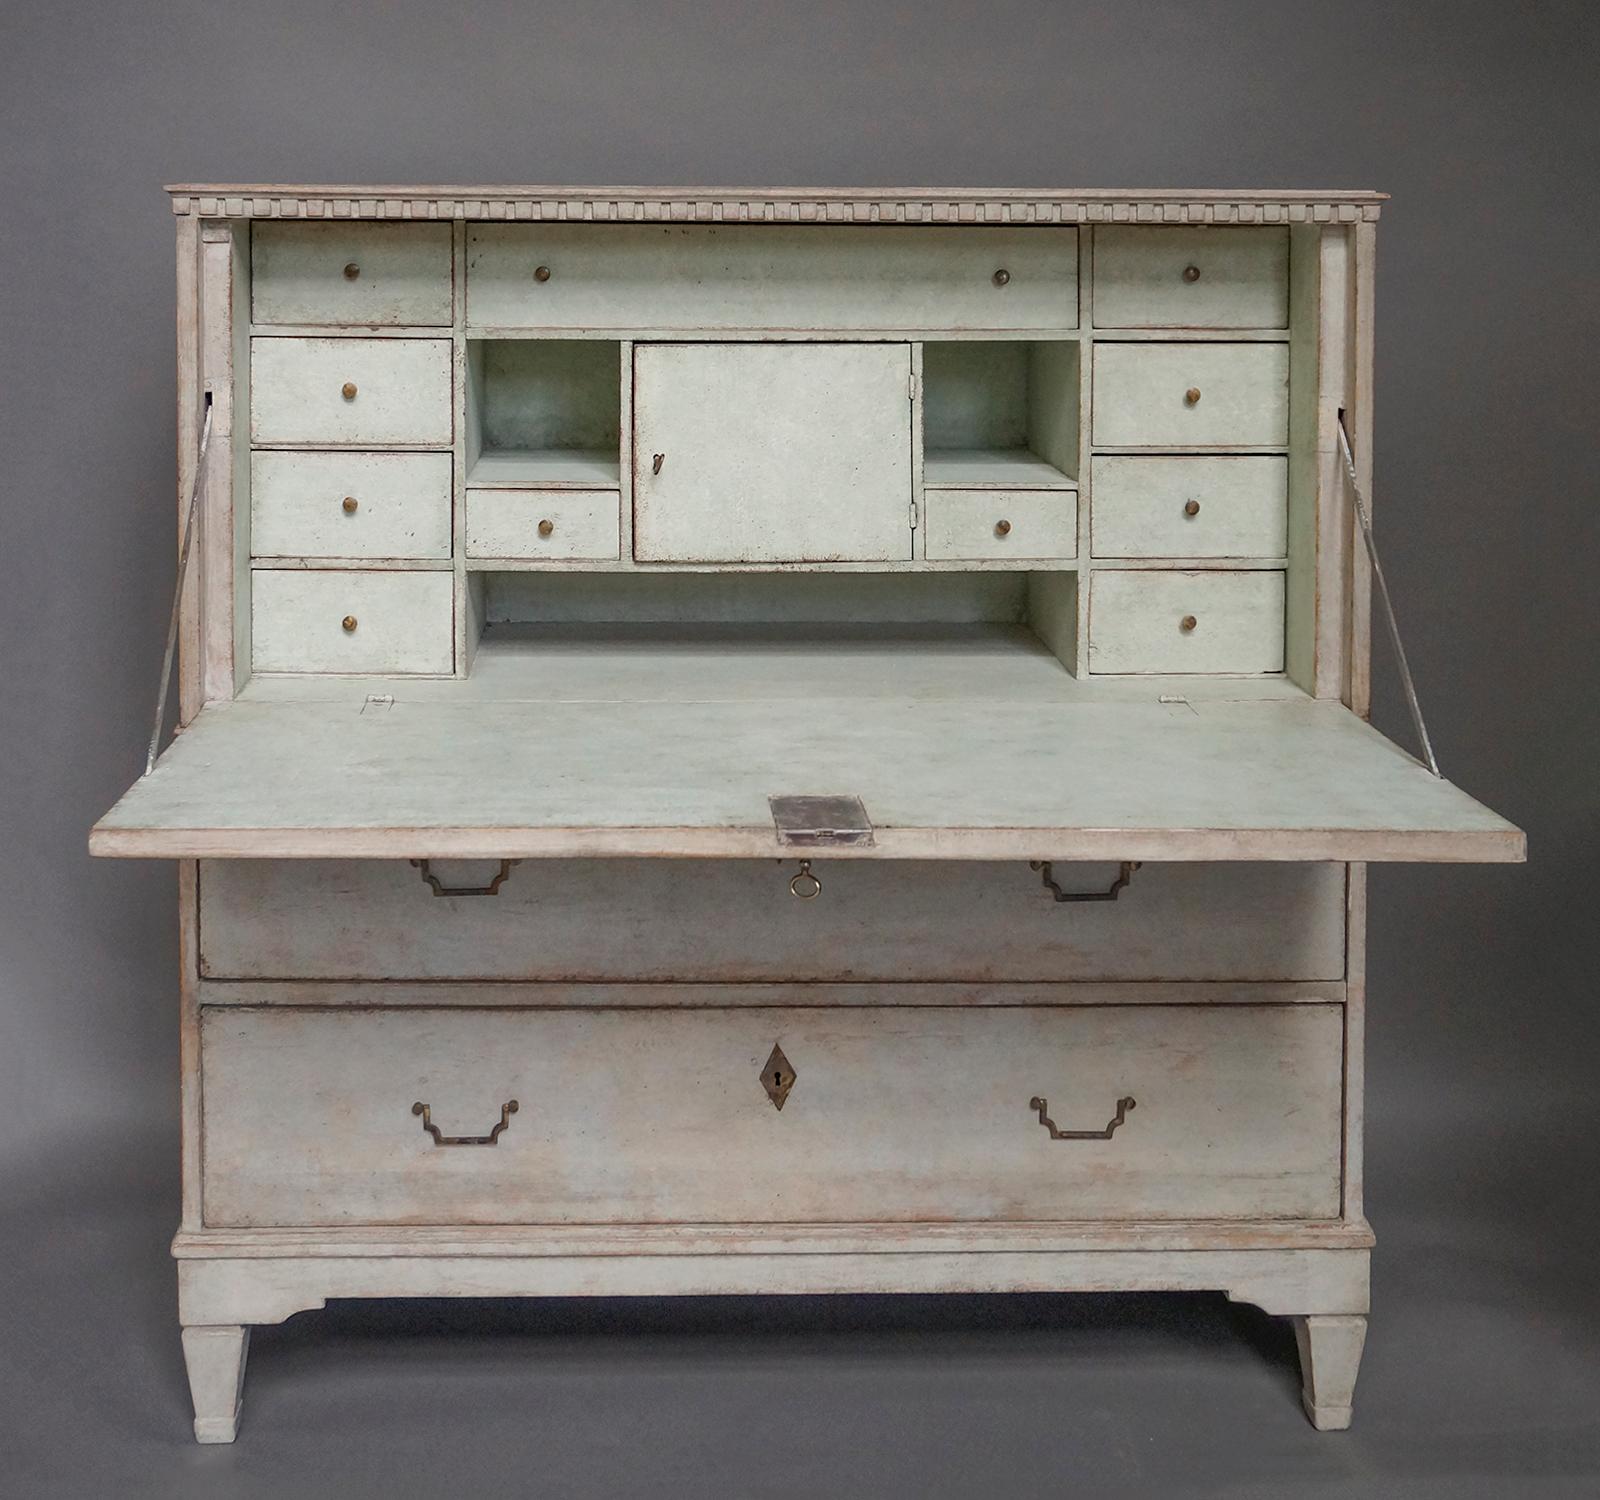 Period Gustavian fall-front writing desk, Sweden, circa 1820, with fitted interior. The front panel with reeded detail opens to reveal banks of drawers and a central compartment. Below the writing surface are two full-width drawers. Dentil molding